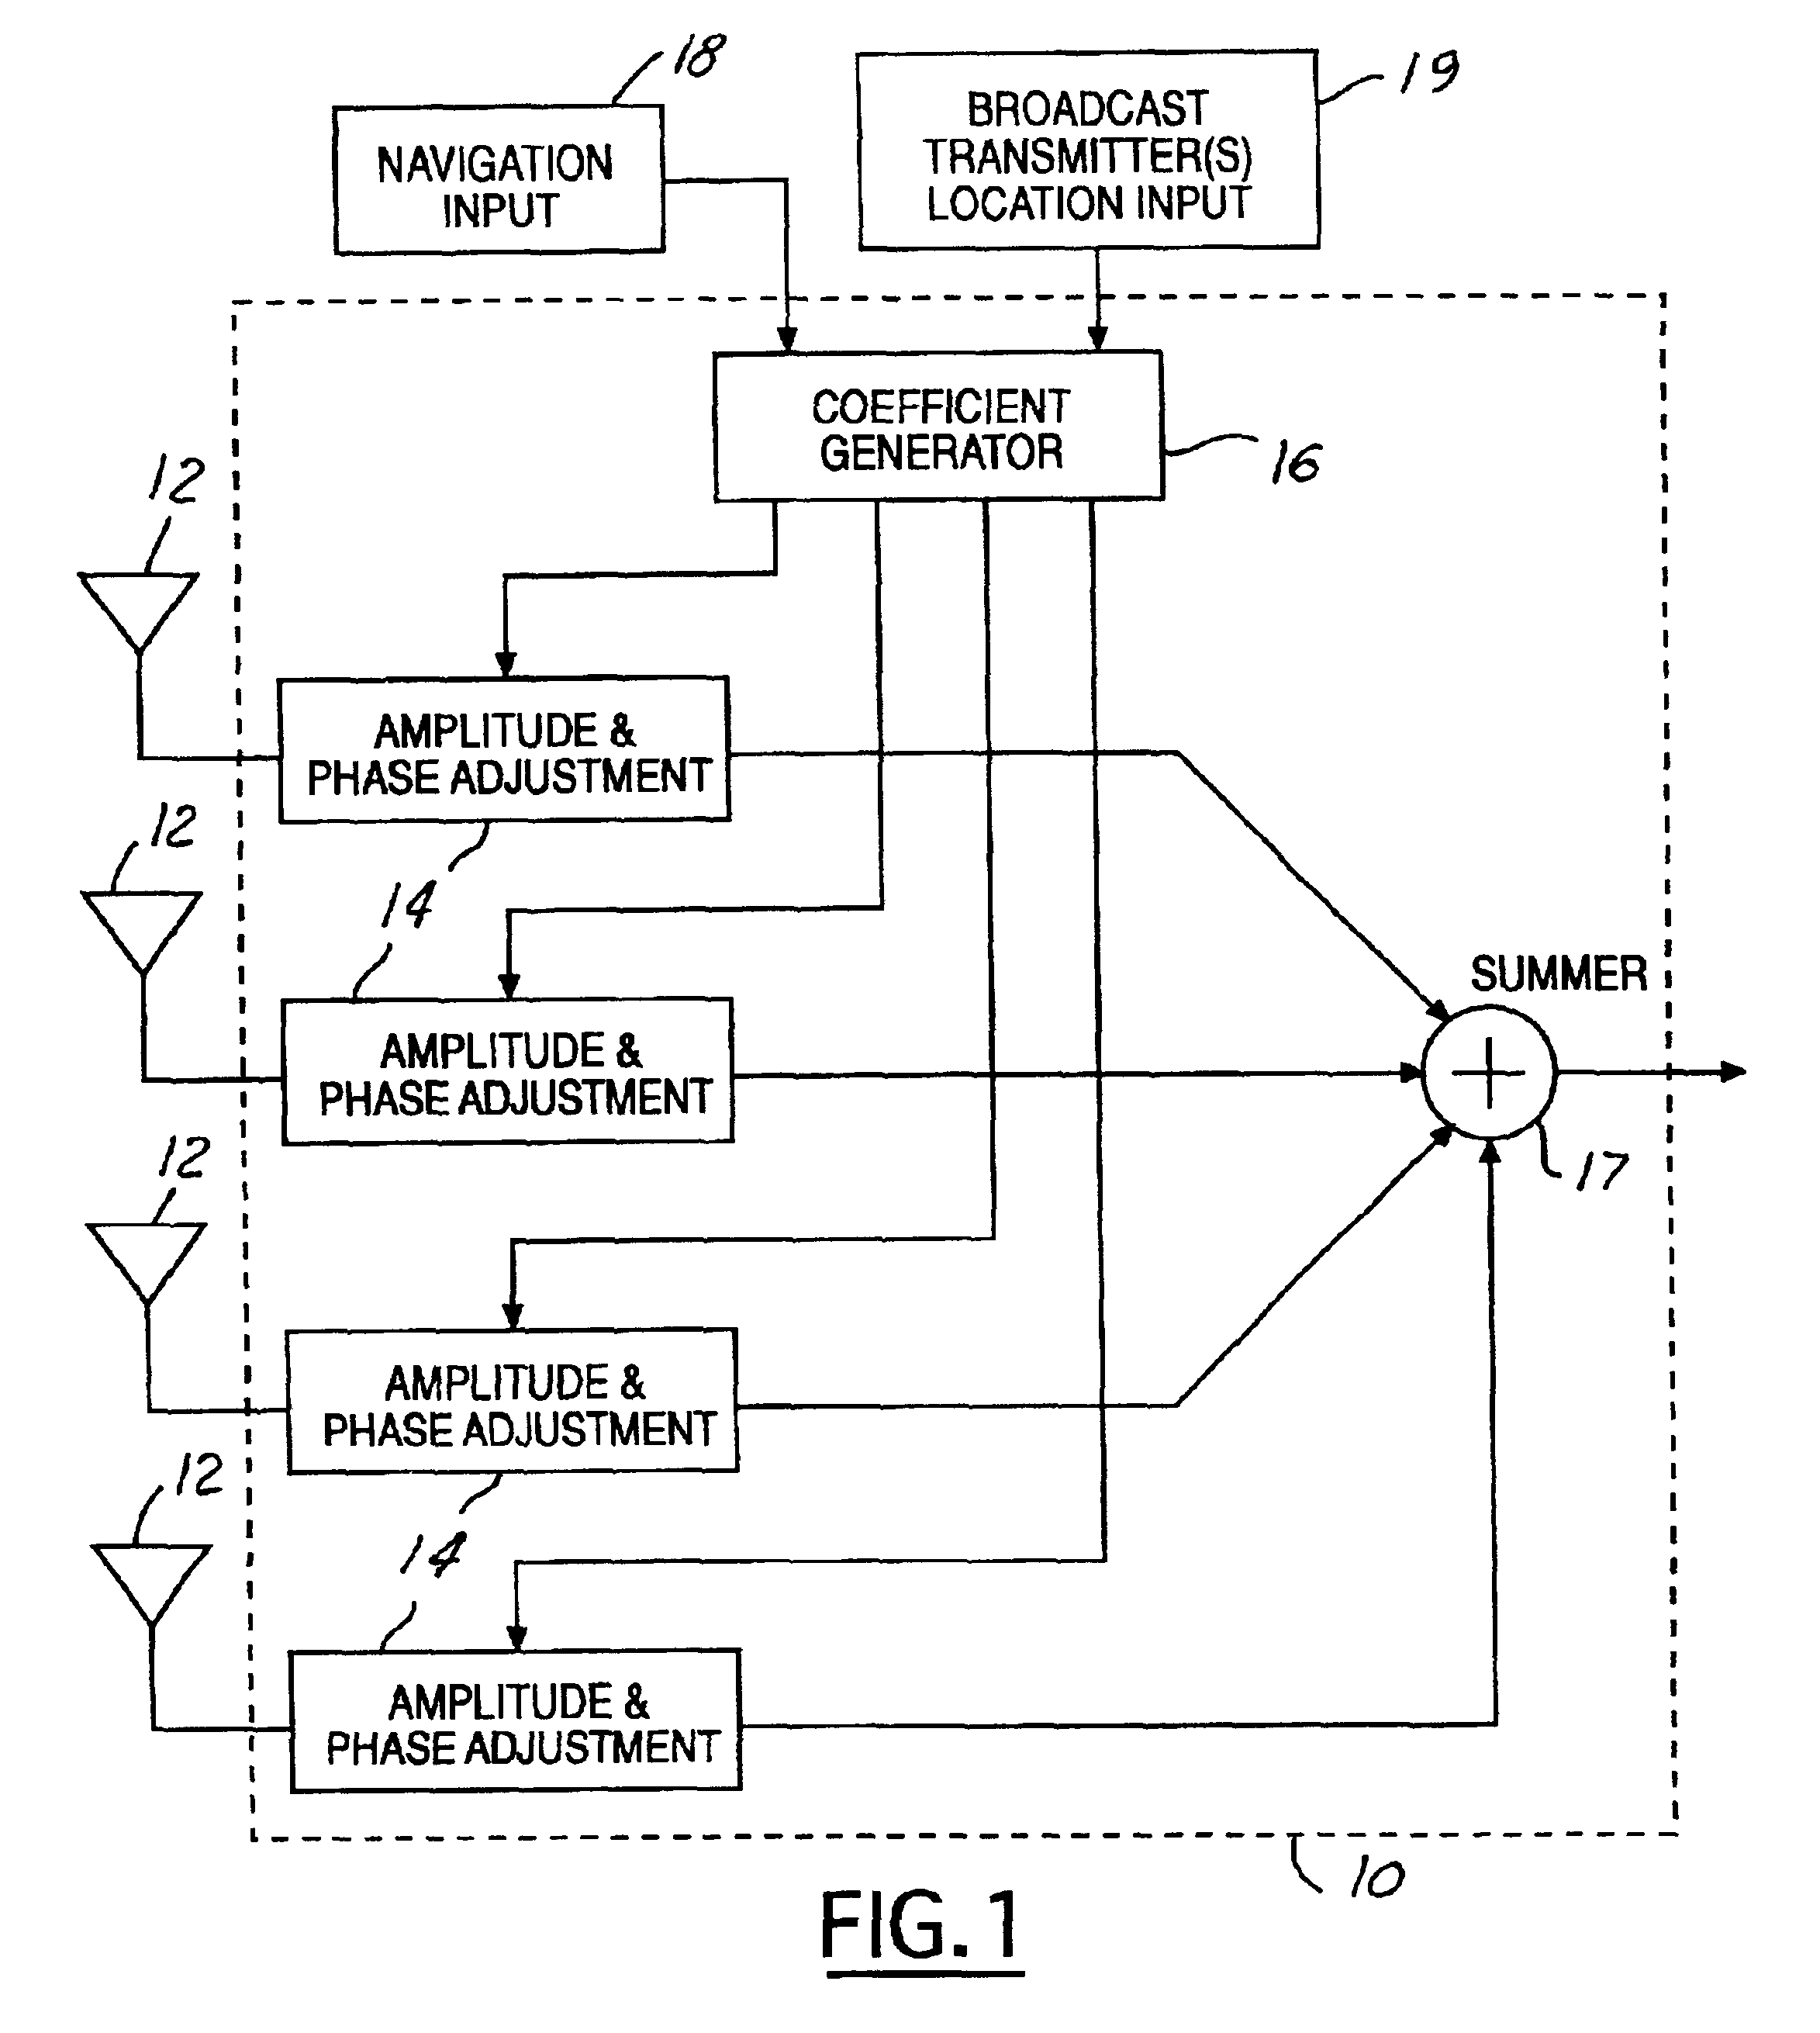 Antenna beam steering responsive to receiver and broadcast transmitter